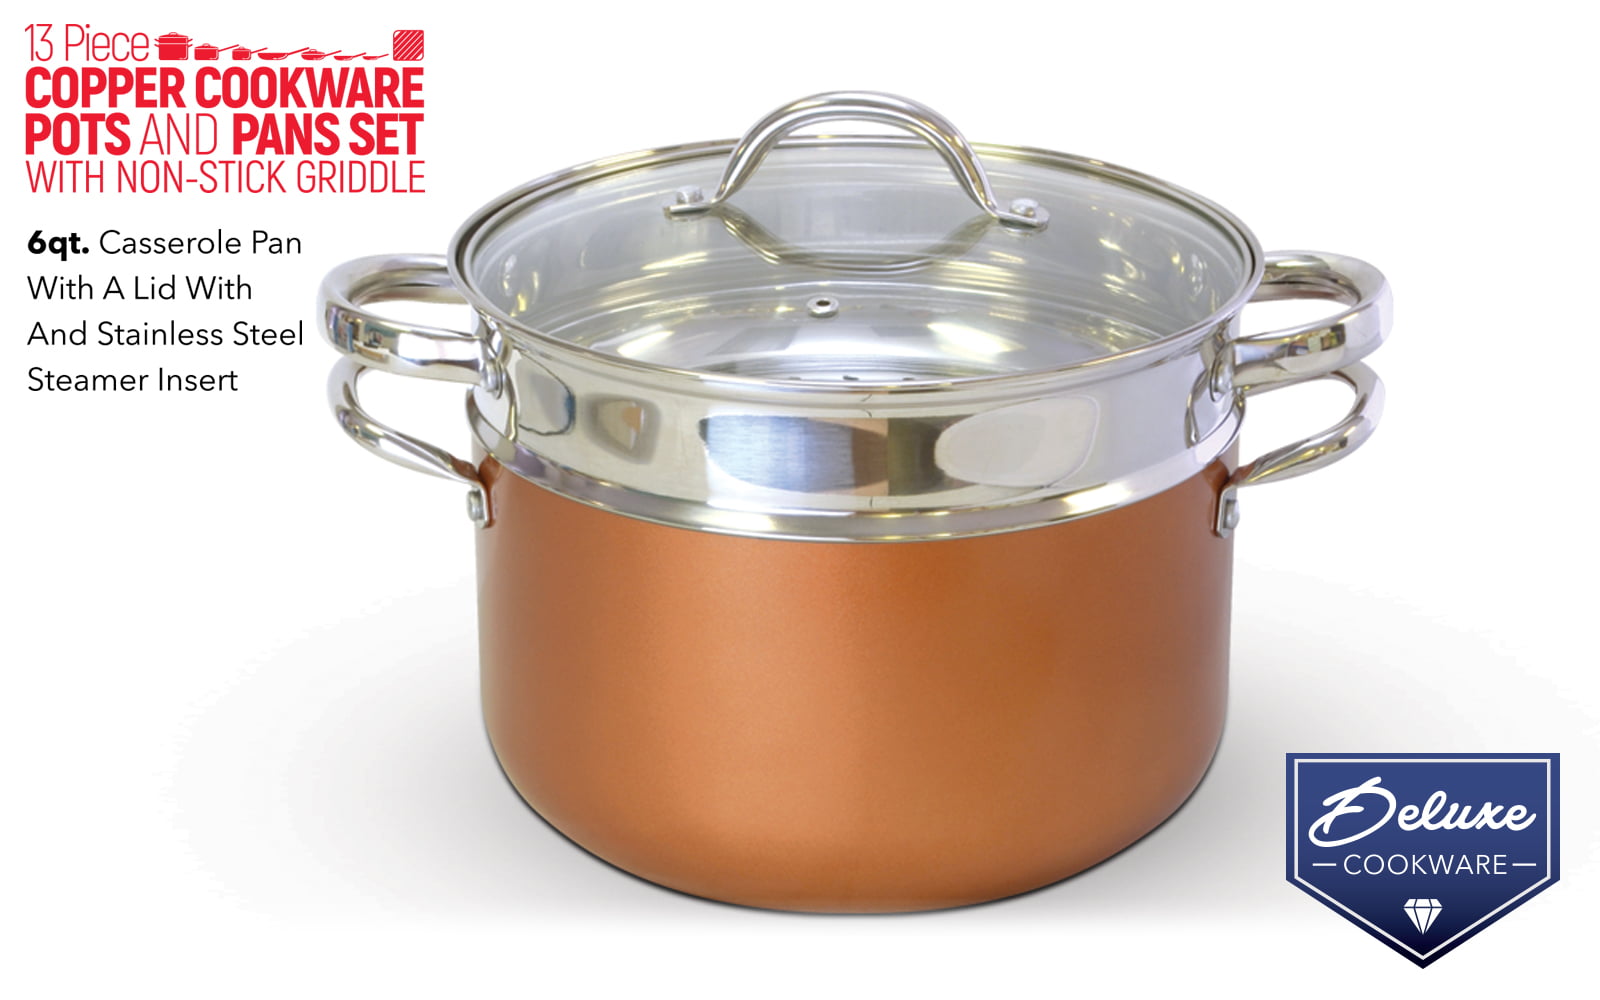 BRENTWOOD 9-Piece Aluminum Non Stick Cookware Set in Copper BPS-309C - The  Home Depot